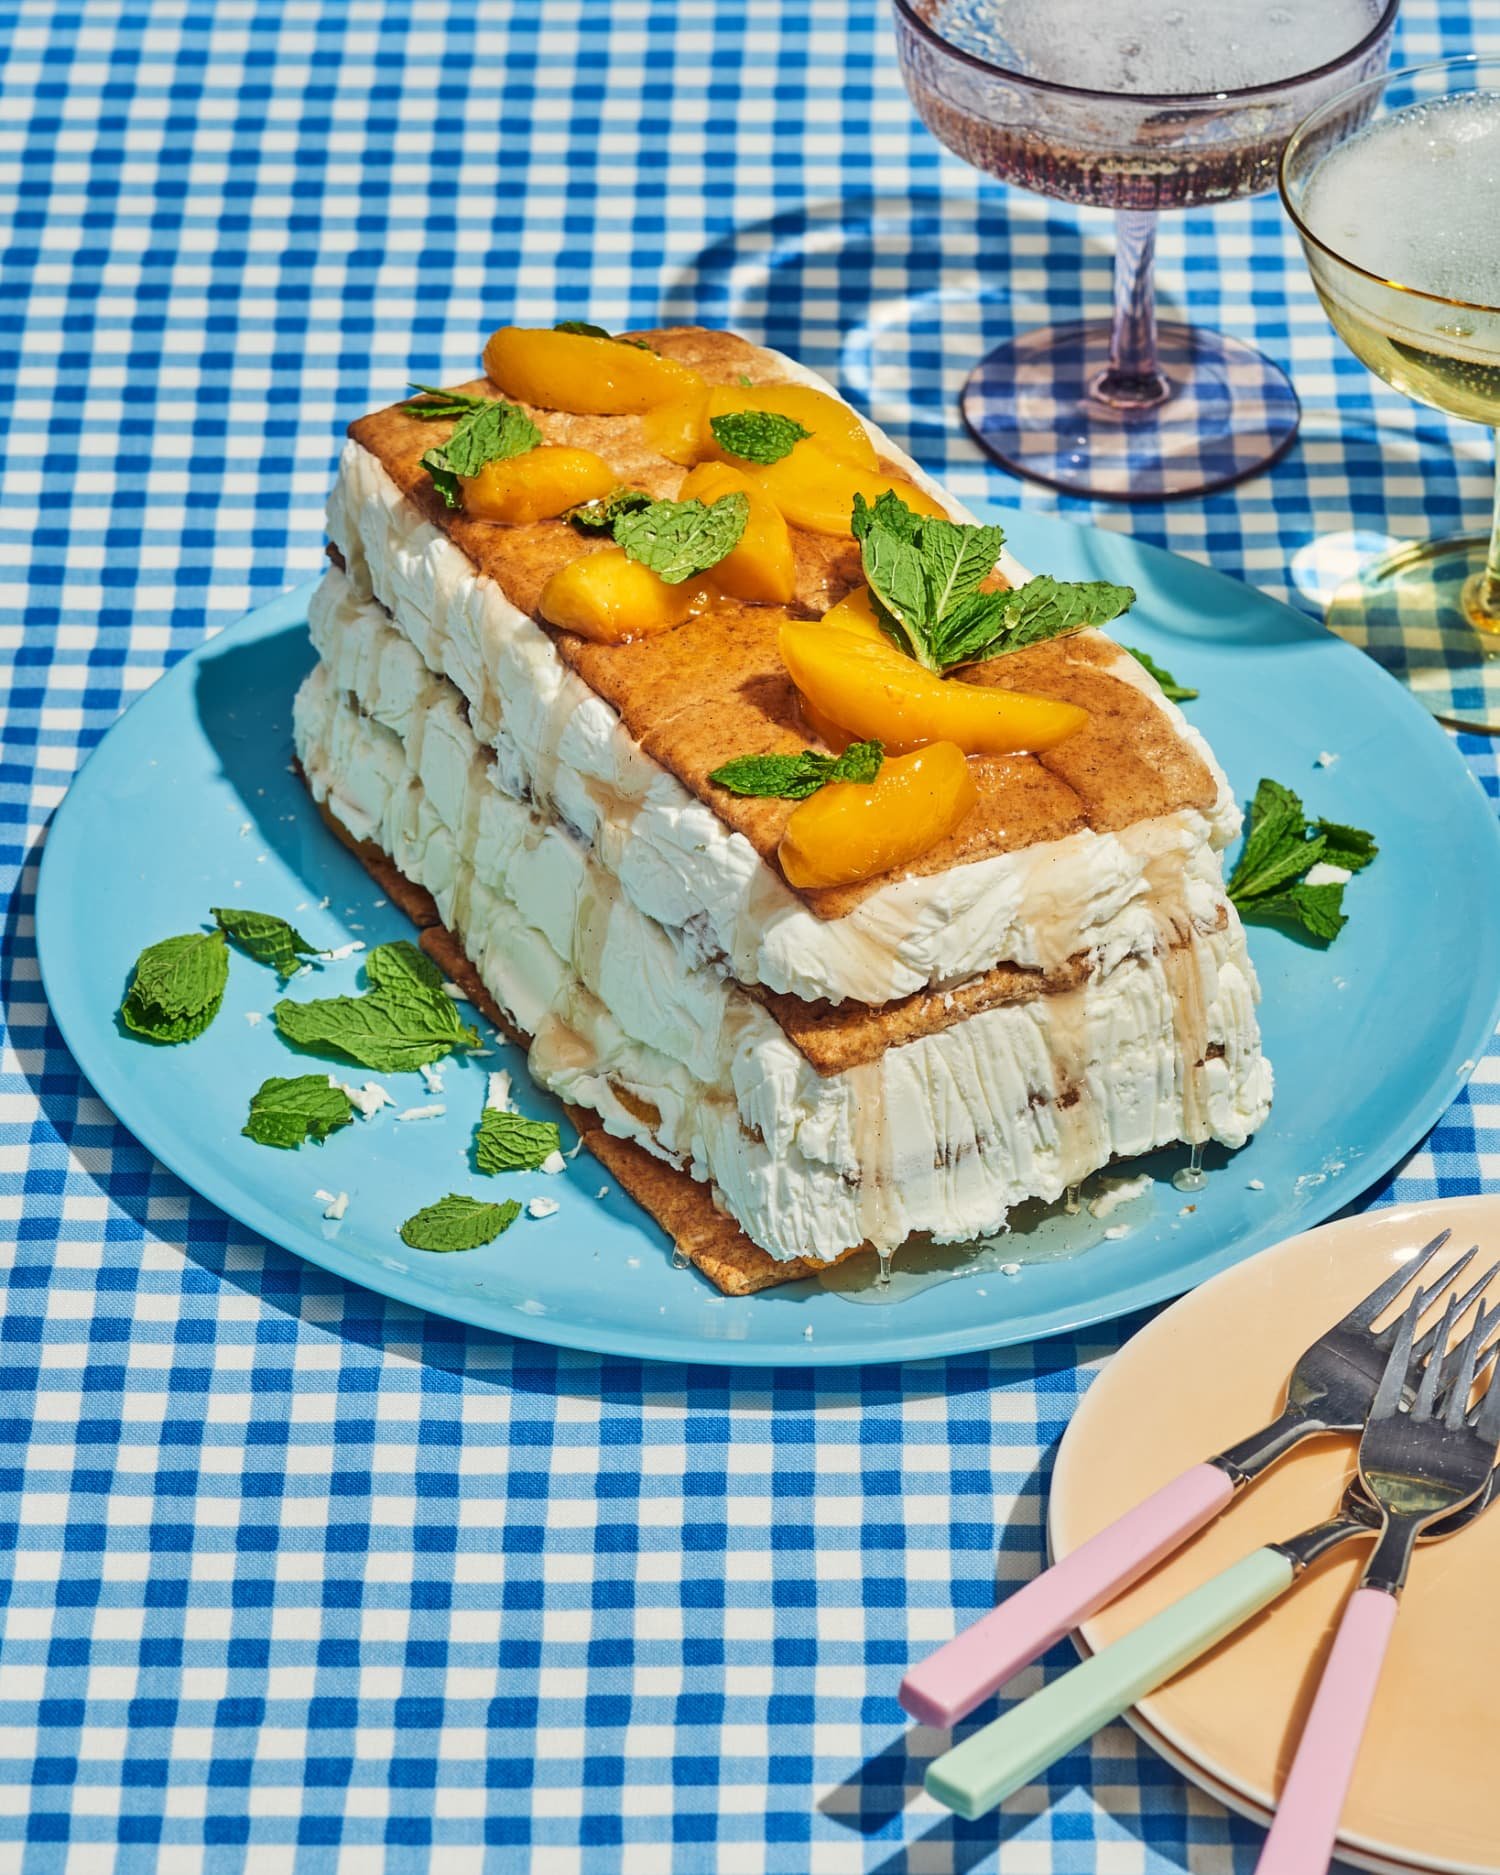 This Peach Delight Icebox Cake Is a Toast to My Southern Queer Community